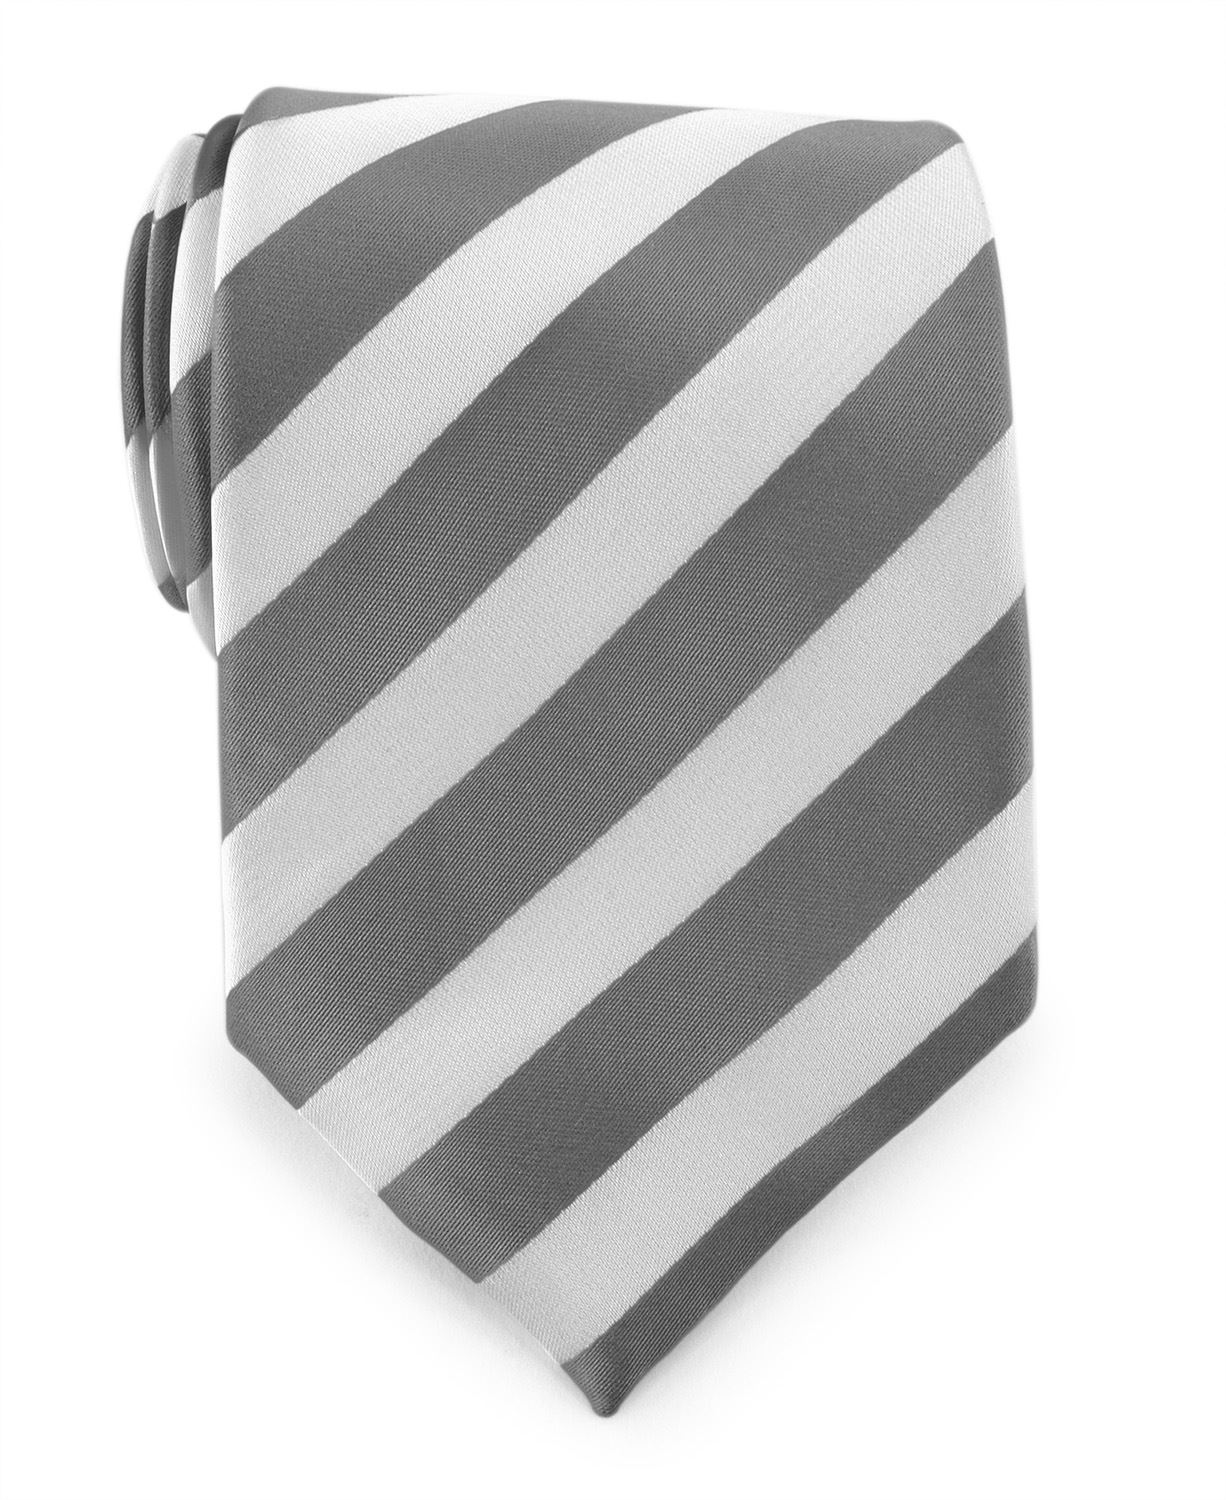 Uomo Vennetto Men's Charcoal and White College Stripe Woven Polyester Tie and Handkerchief Set